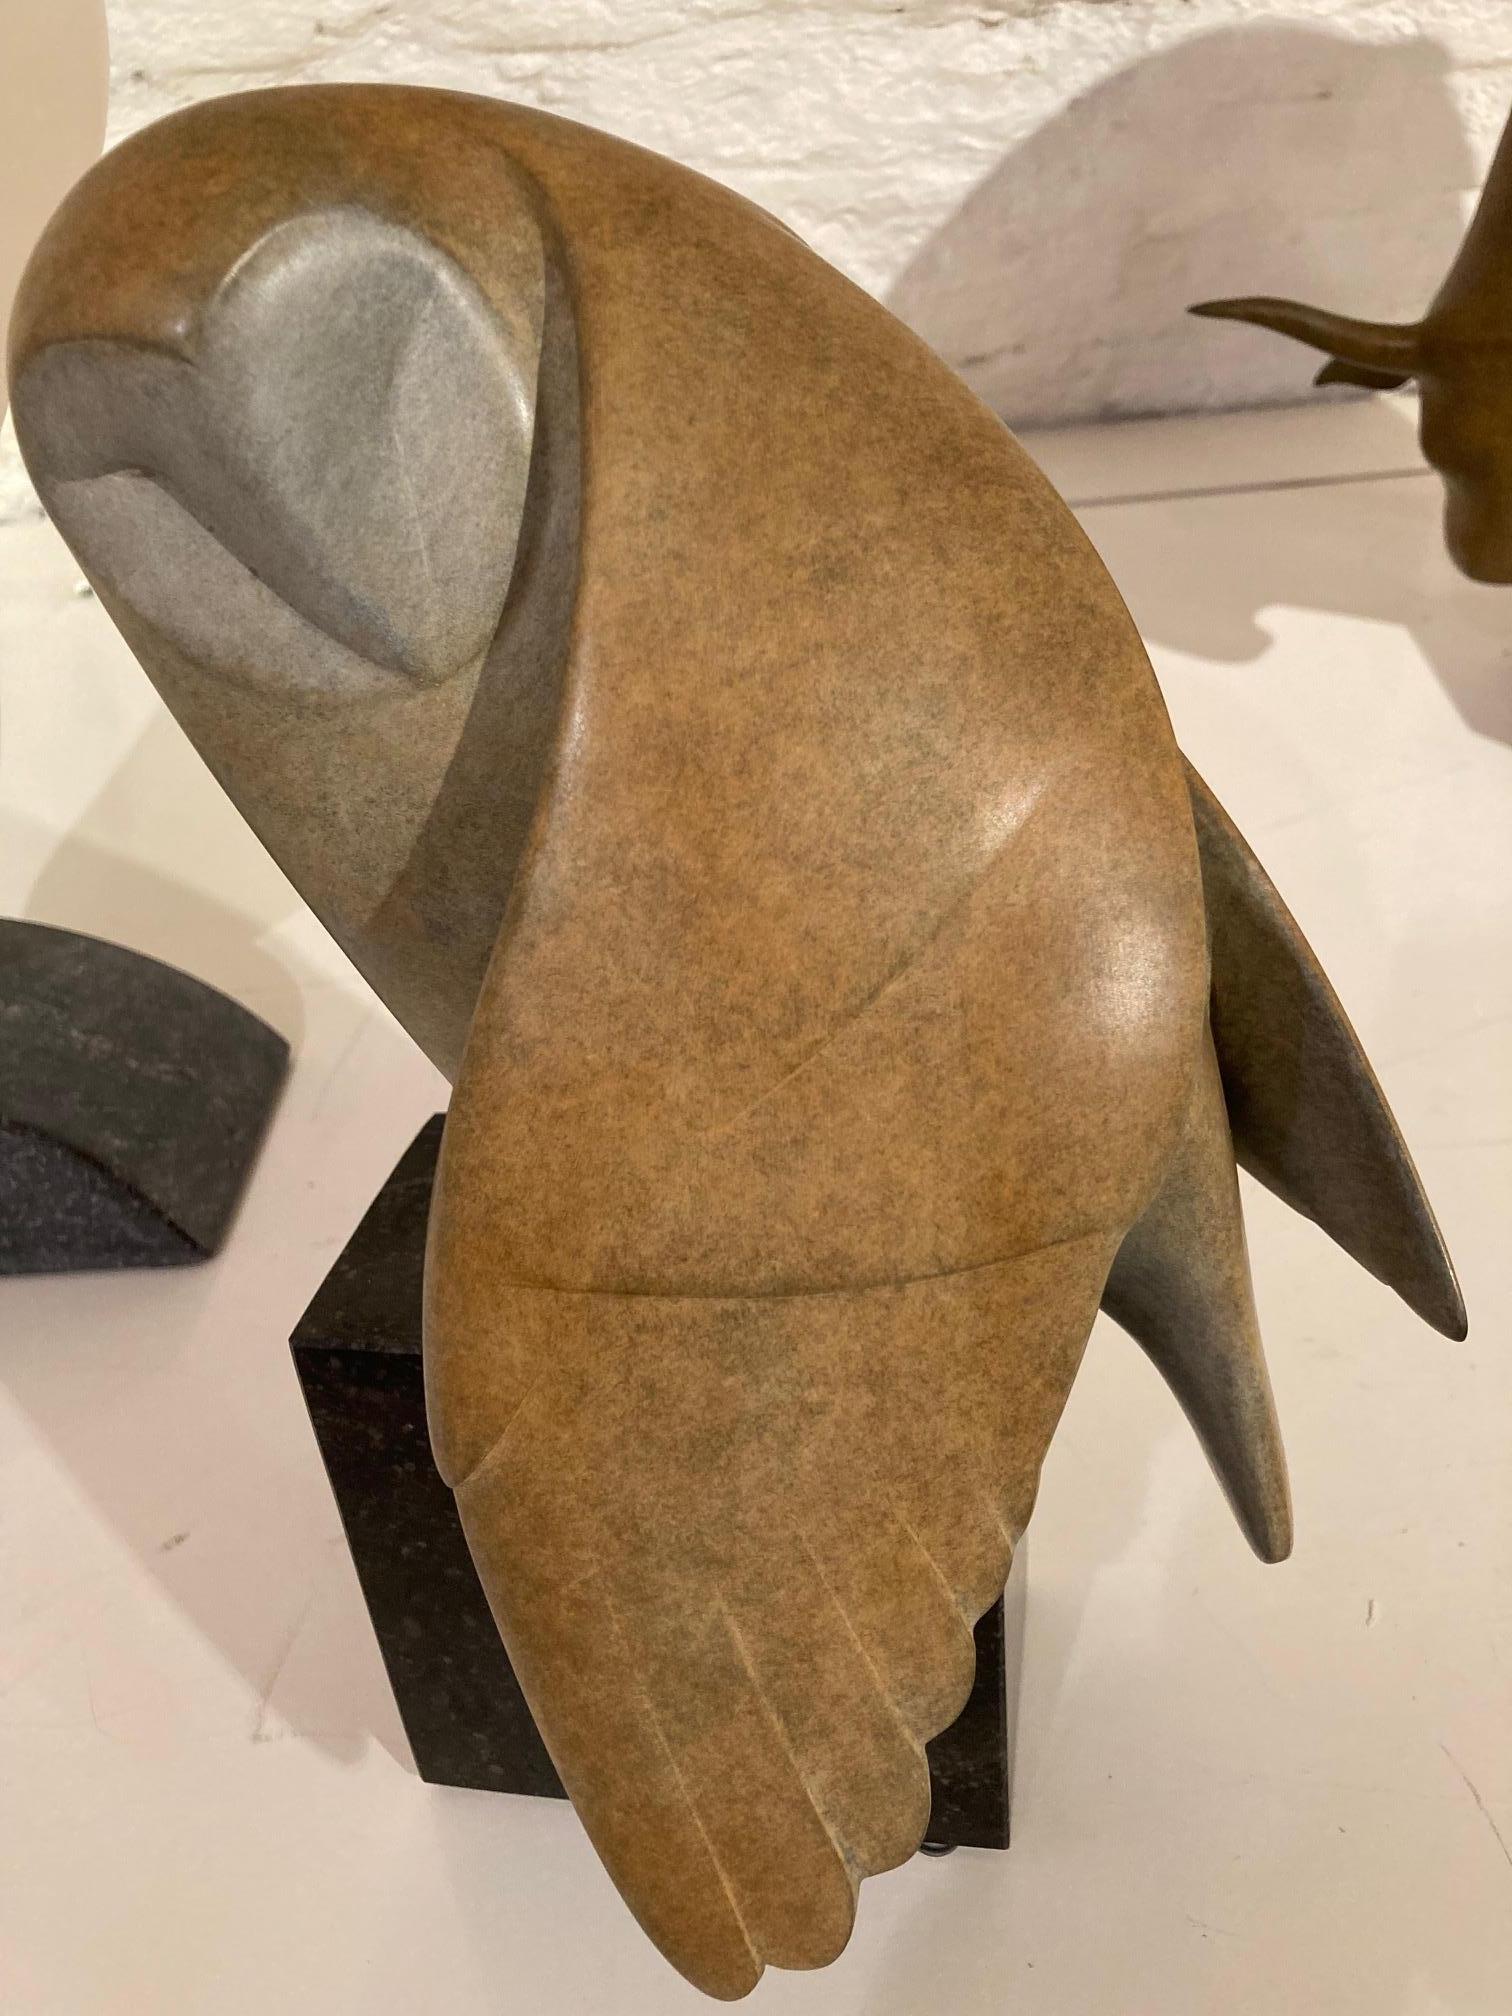 Opkijkende Uil no. 1  (Owl Looking Up) Bronze Sculpture Bird Contemporary In Stock

Evert den Hartog (born in Groot-Ammers, The Netherlands in 1949) followed his education to be a sculptor at the Rotterdam Academy of Visual Arts. In the years